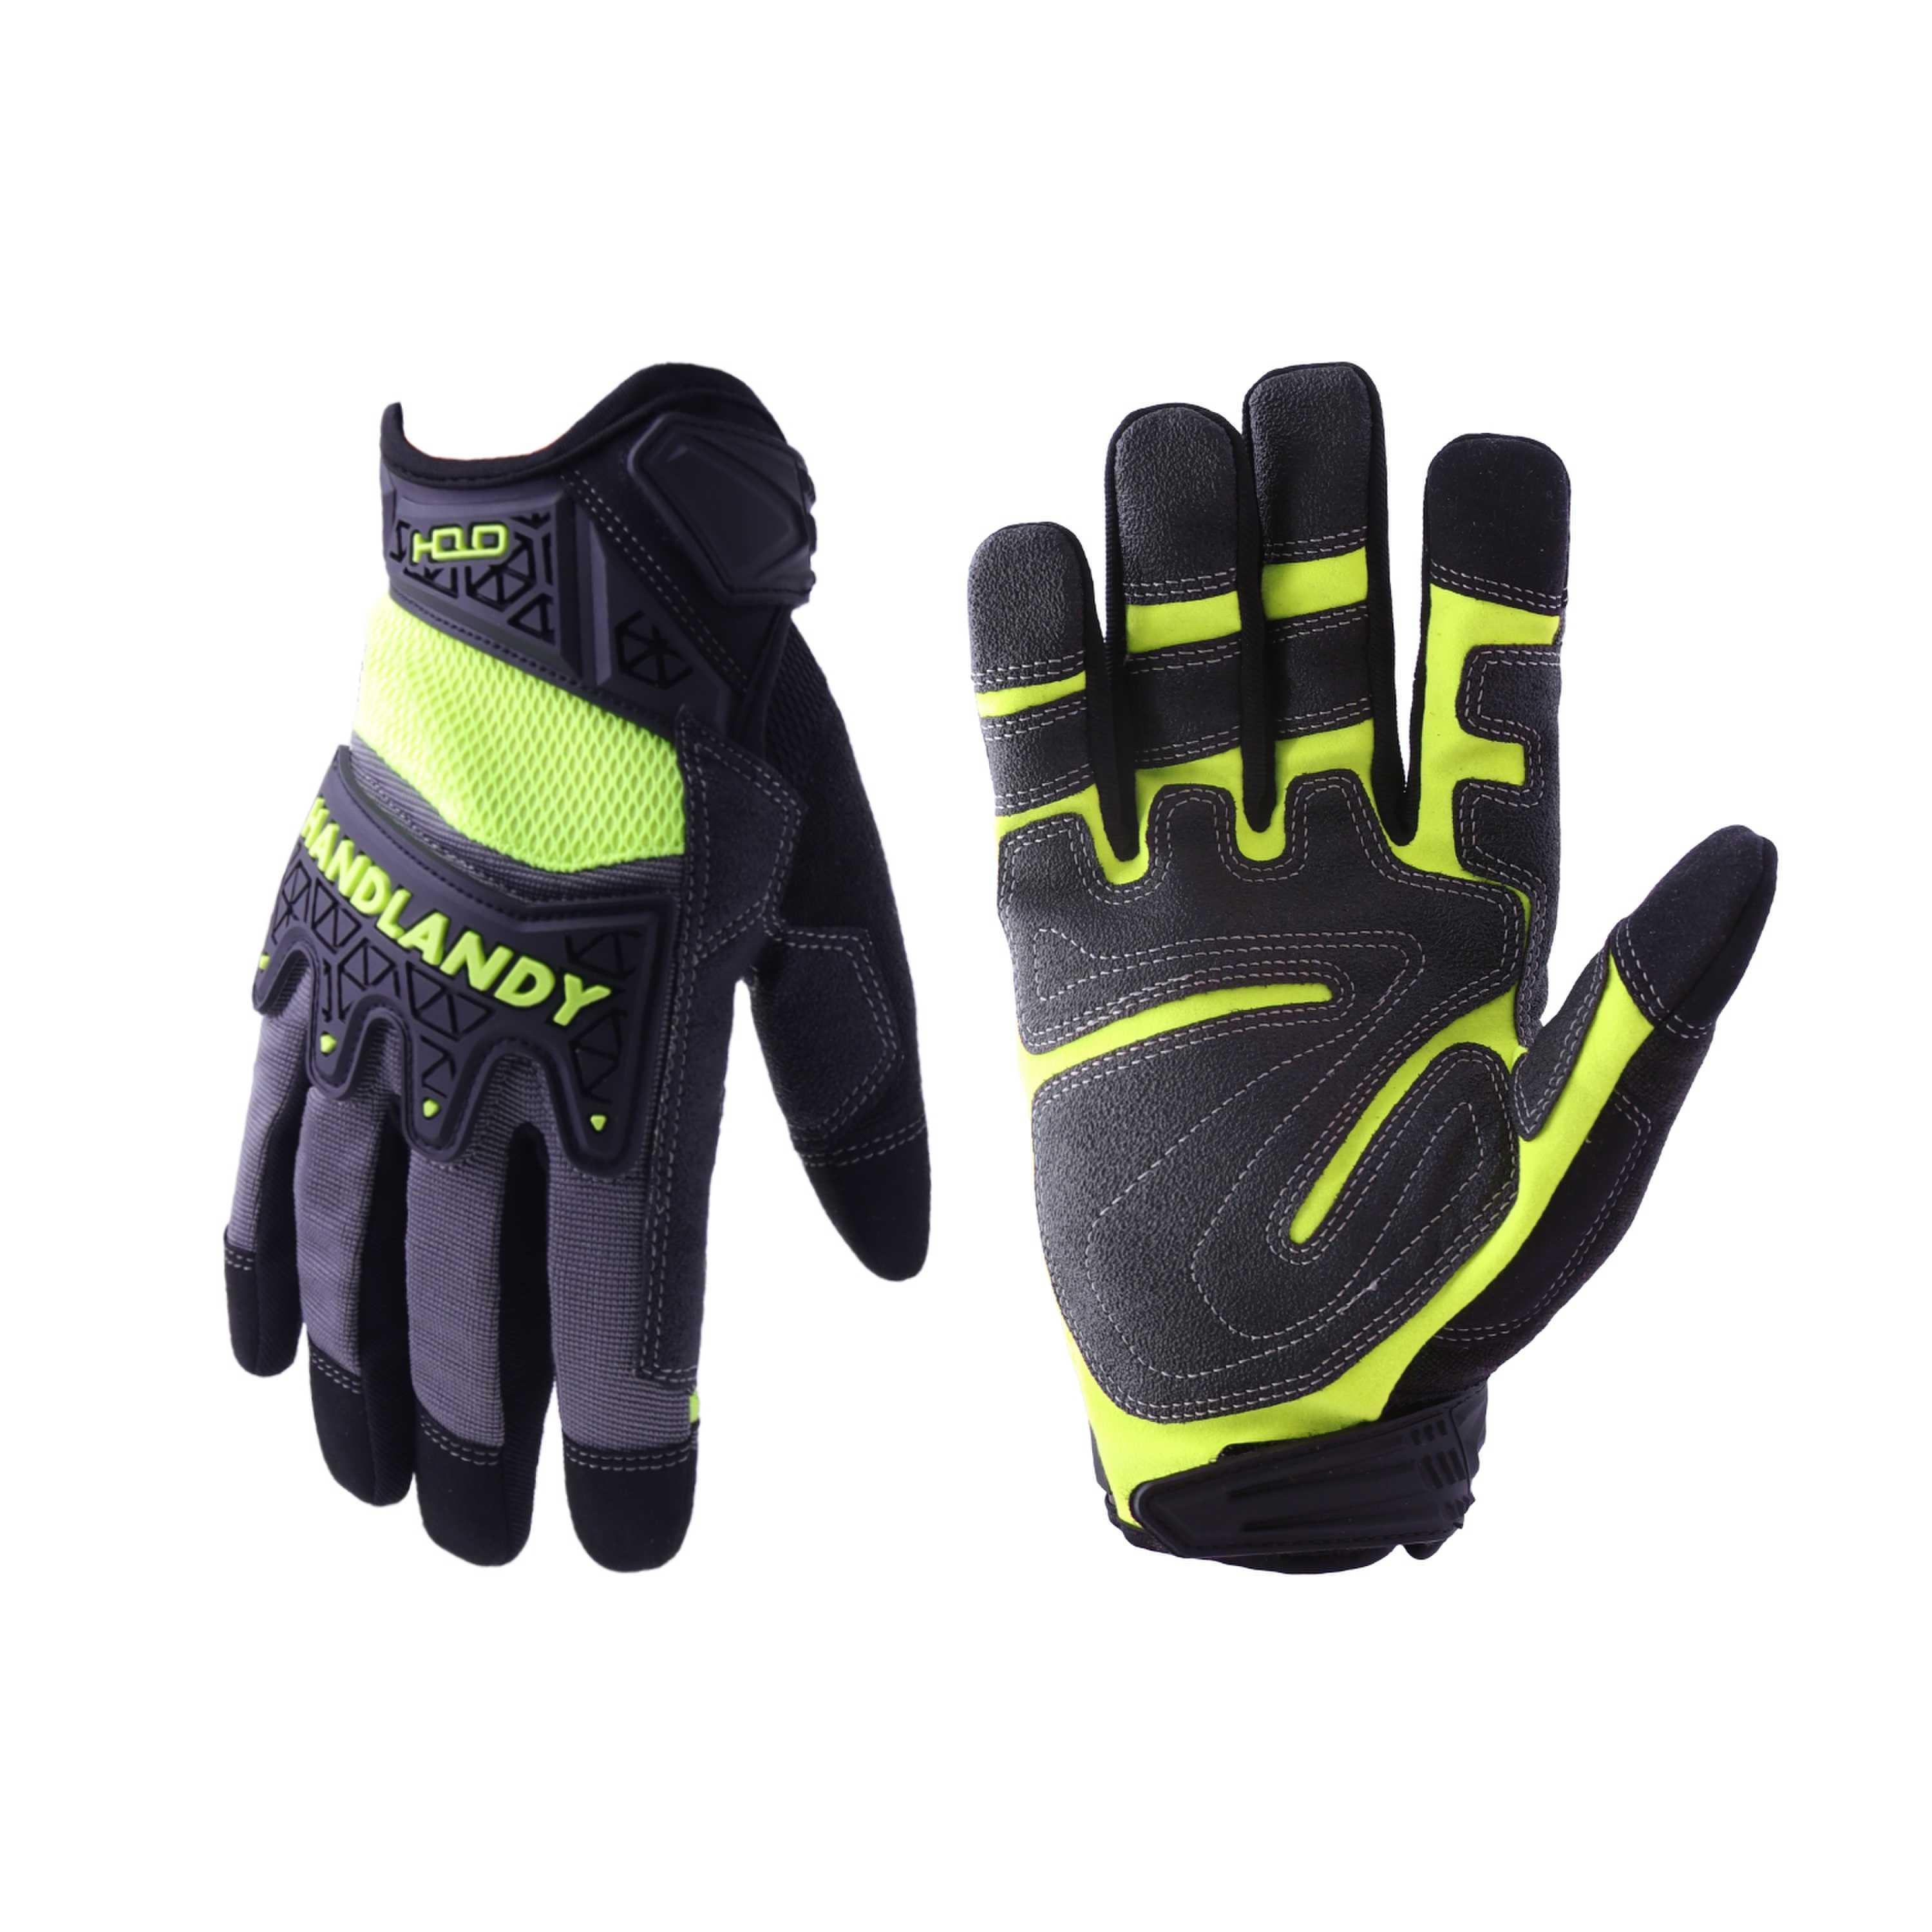 6197 PRI Hi-vis fluorescent green outdoor TPR protect anti abrasion construction machinery high quality safety work gloves